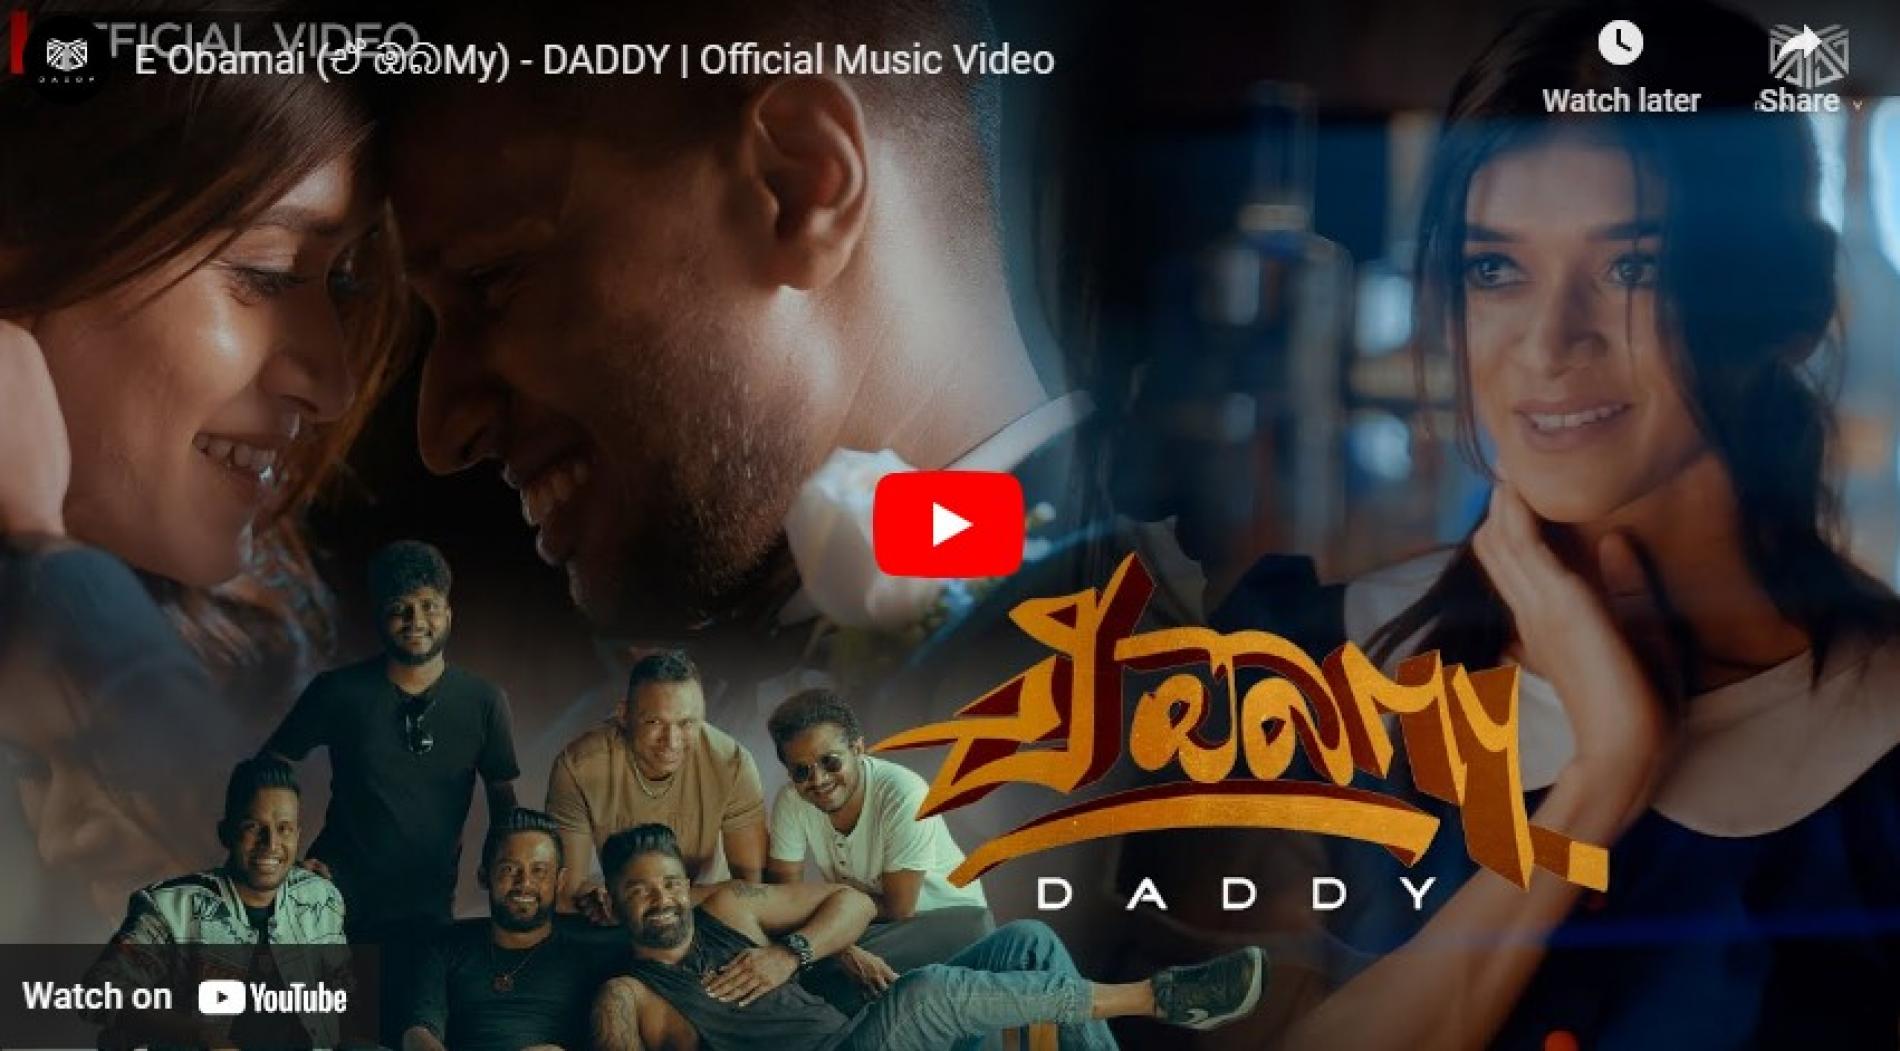 New Music : E Obamai (ඒ ඔබMy) – DADDY | Official Music Video